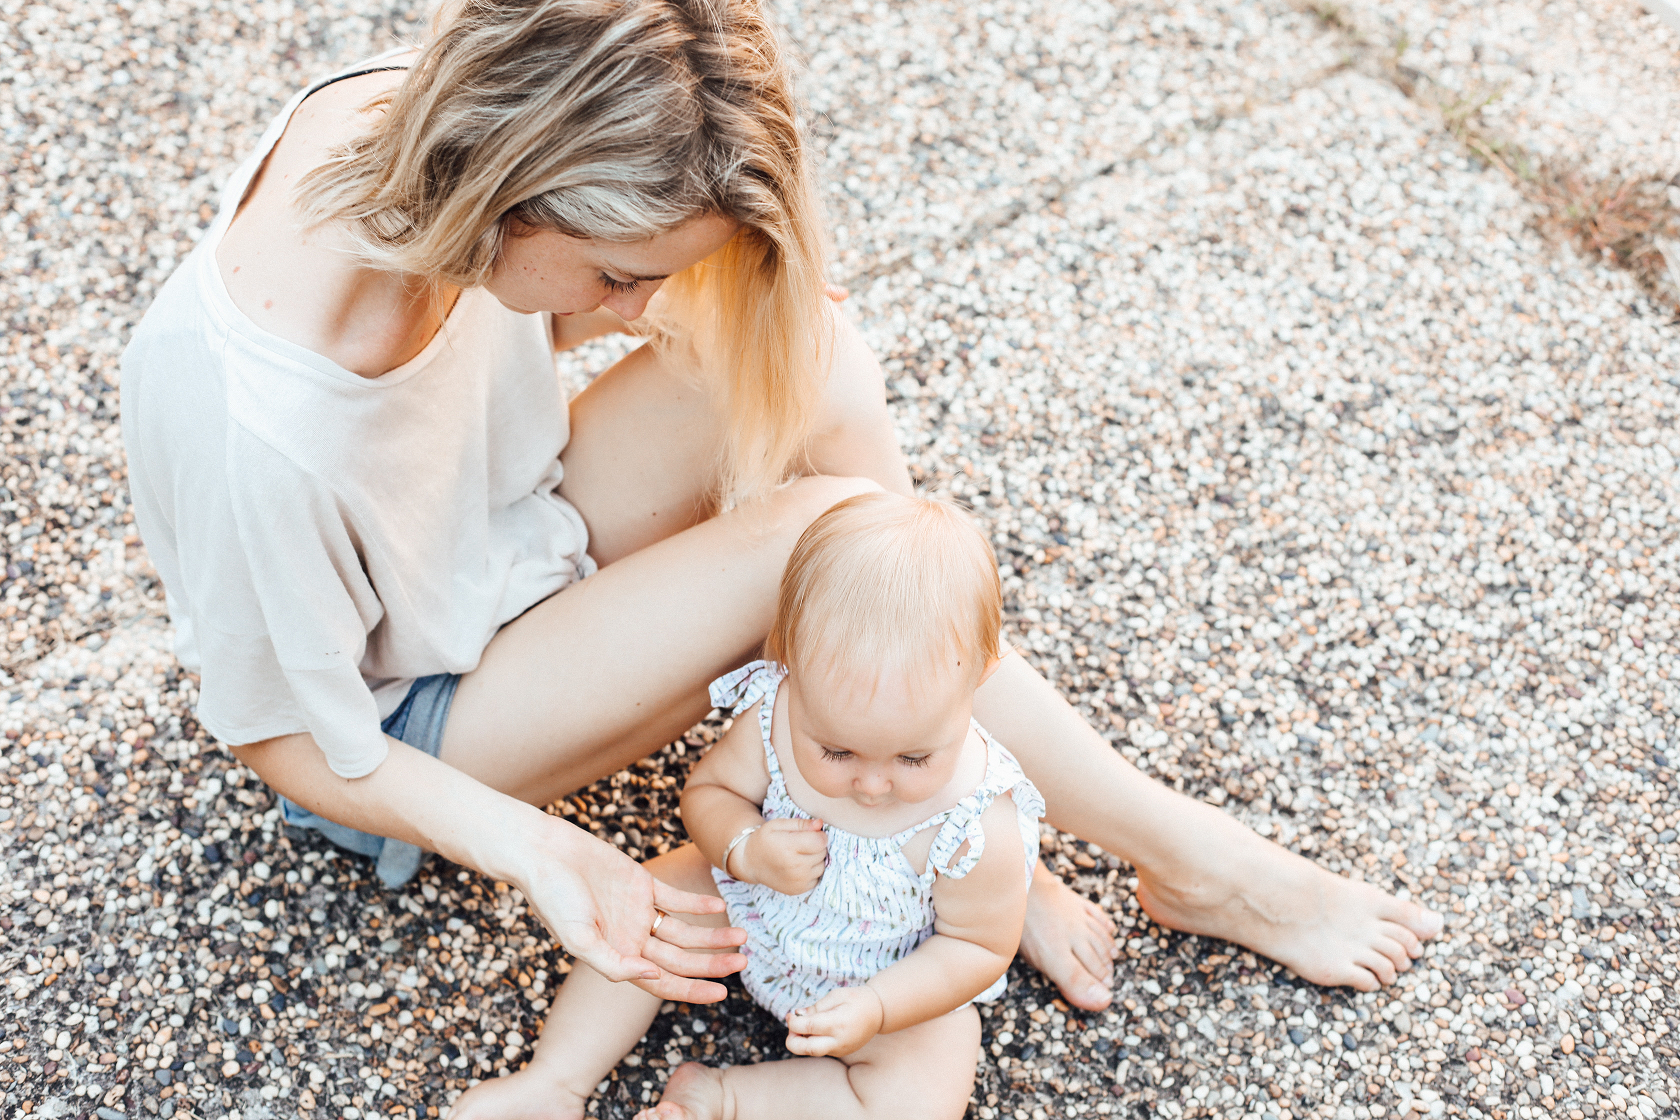 Back Pain Facts First-Time Moms Should Know